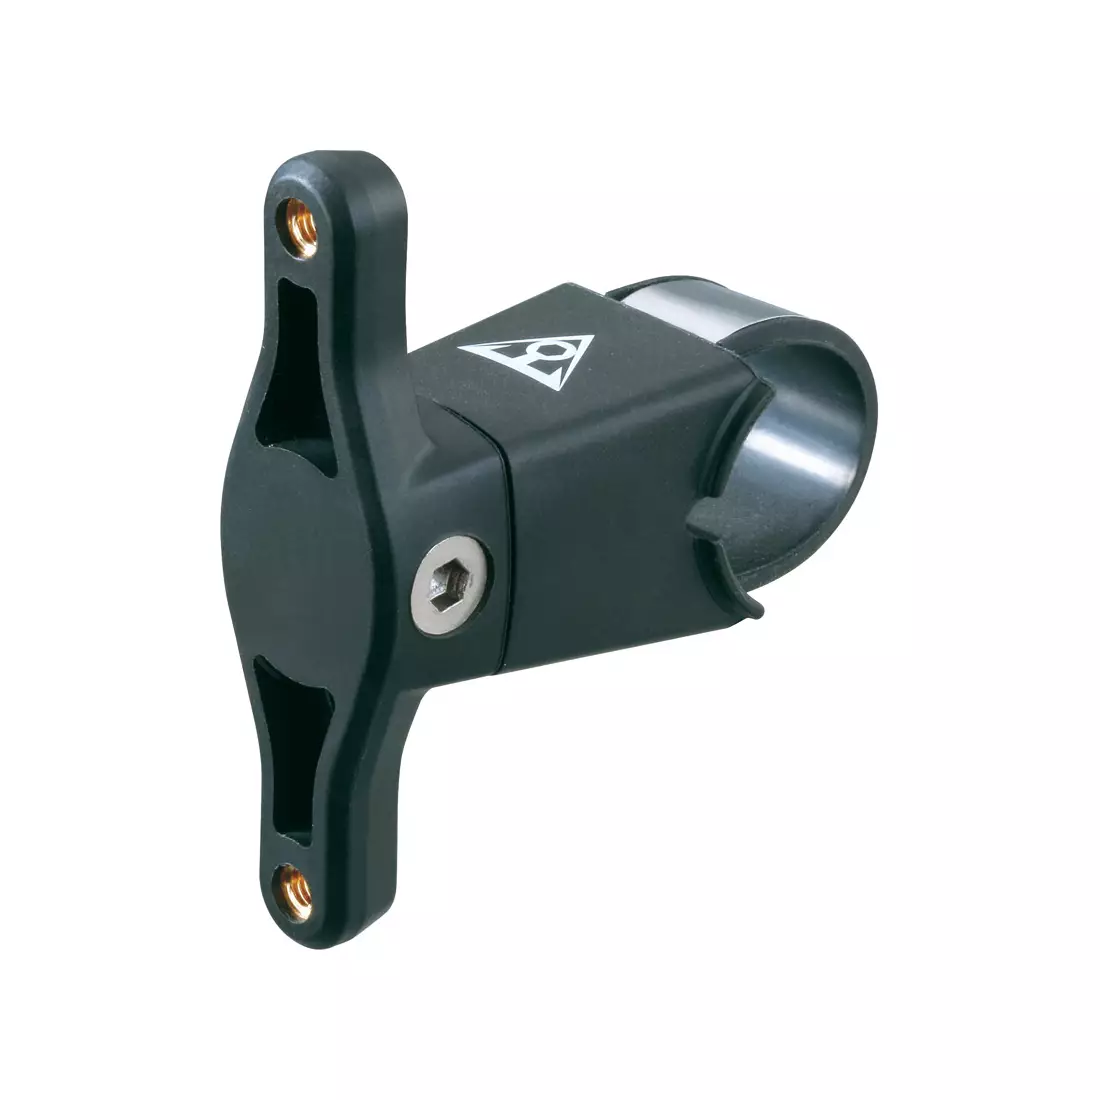 TOPEAK BASKET CAGE MOUNT (adapter for mounting a bottle cage) T-TCM01